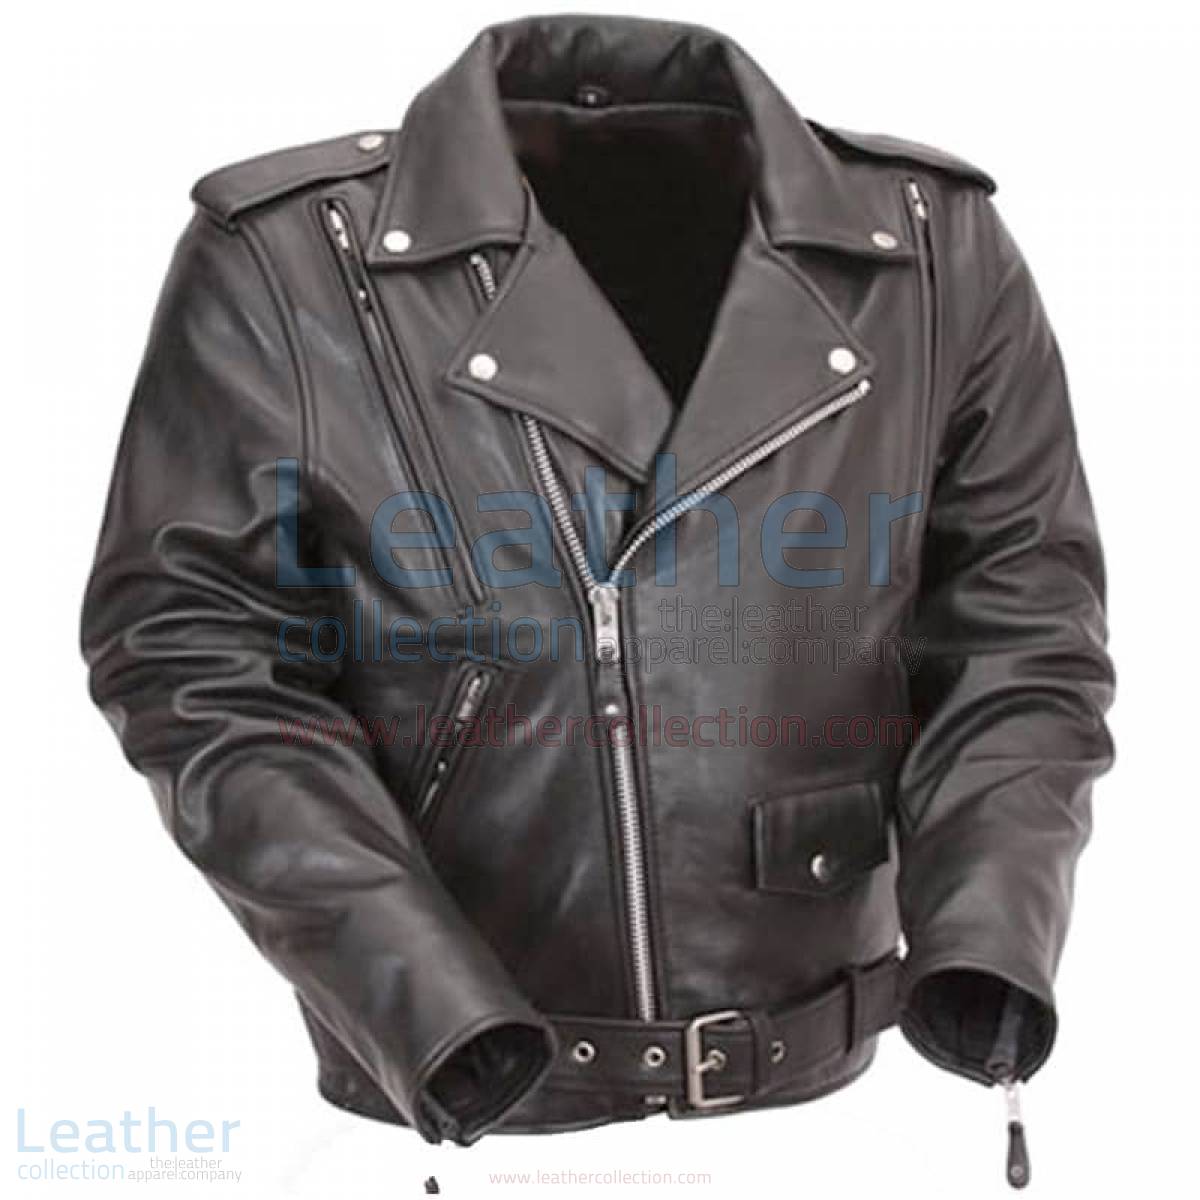 Black Leather Motorcycle Jacket with Exclusive Built-in Back Support ...